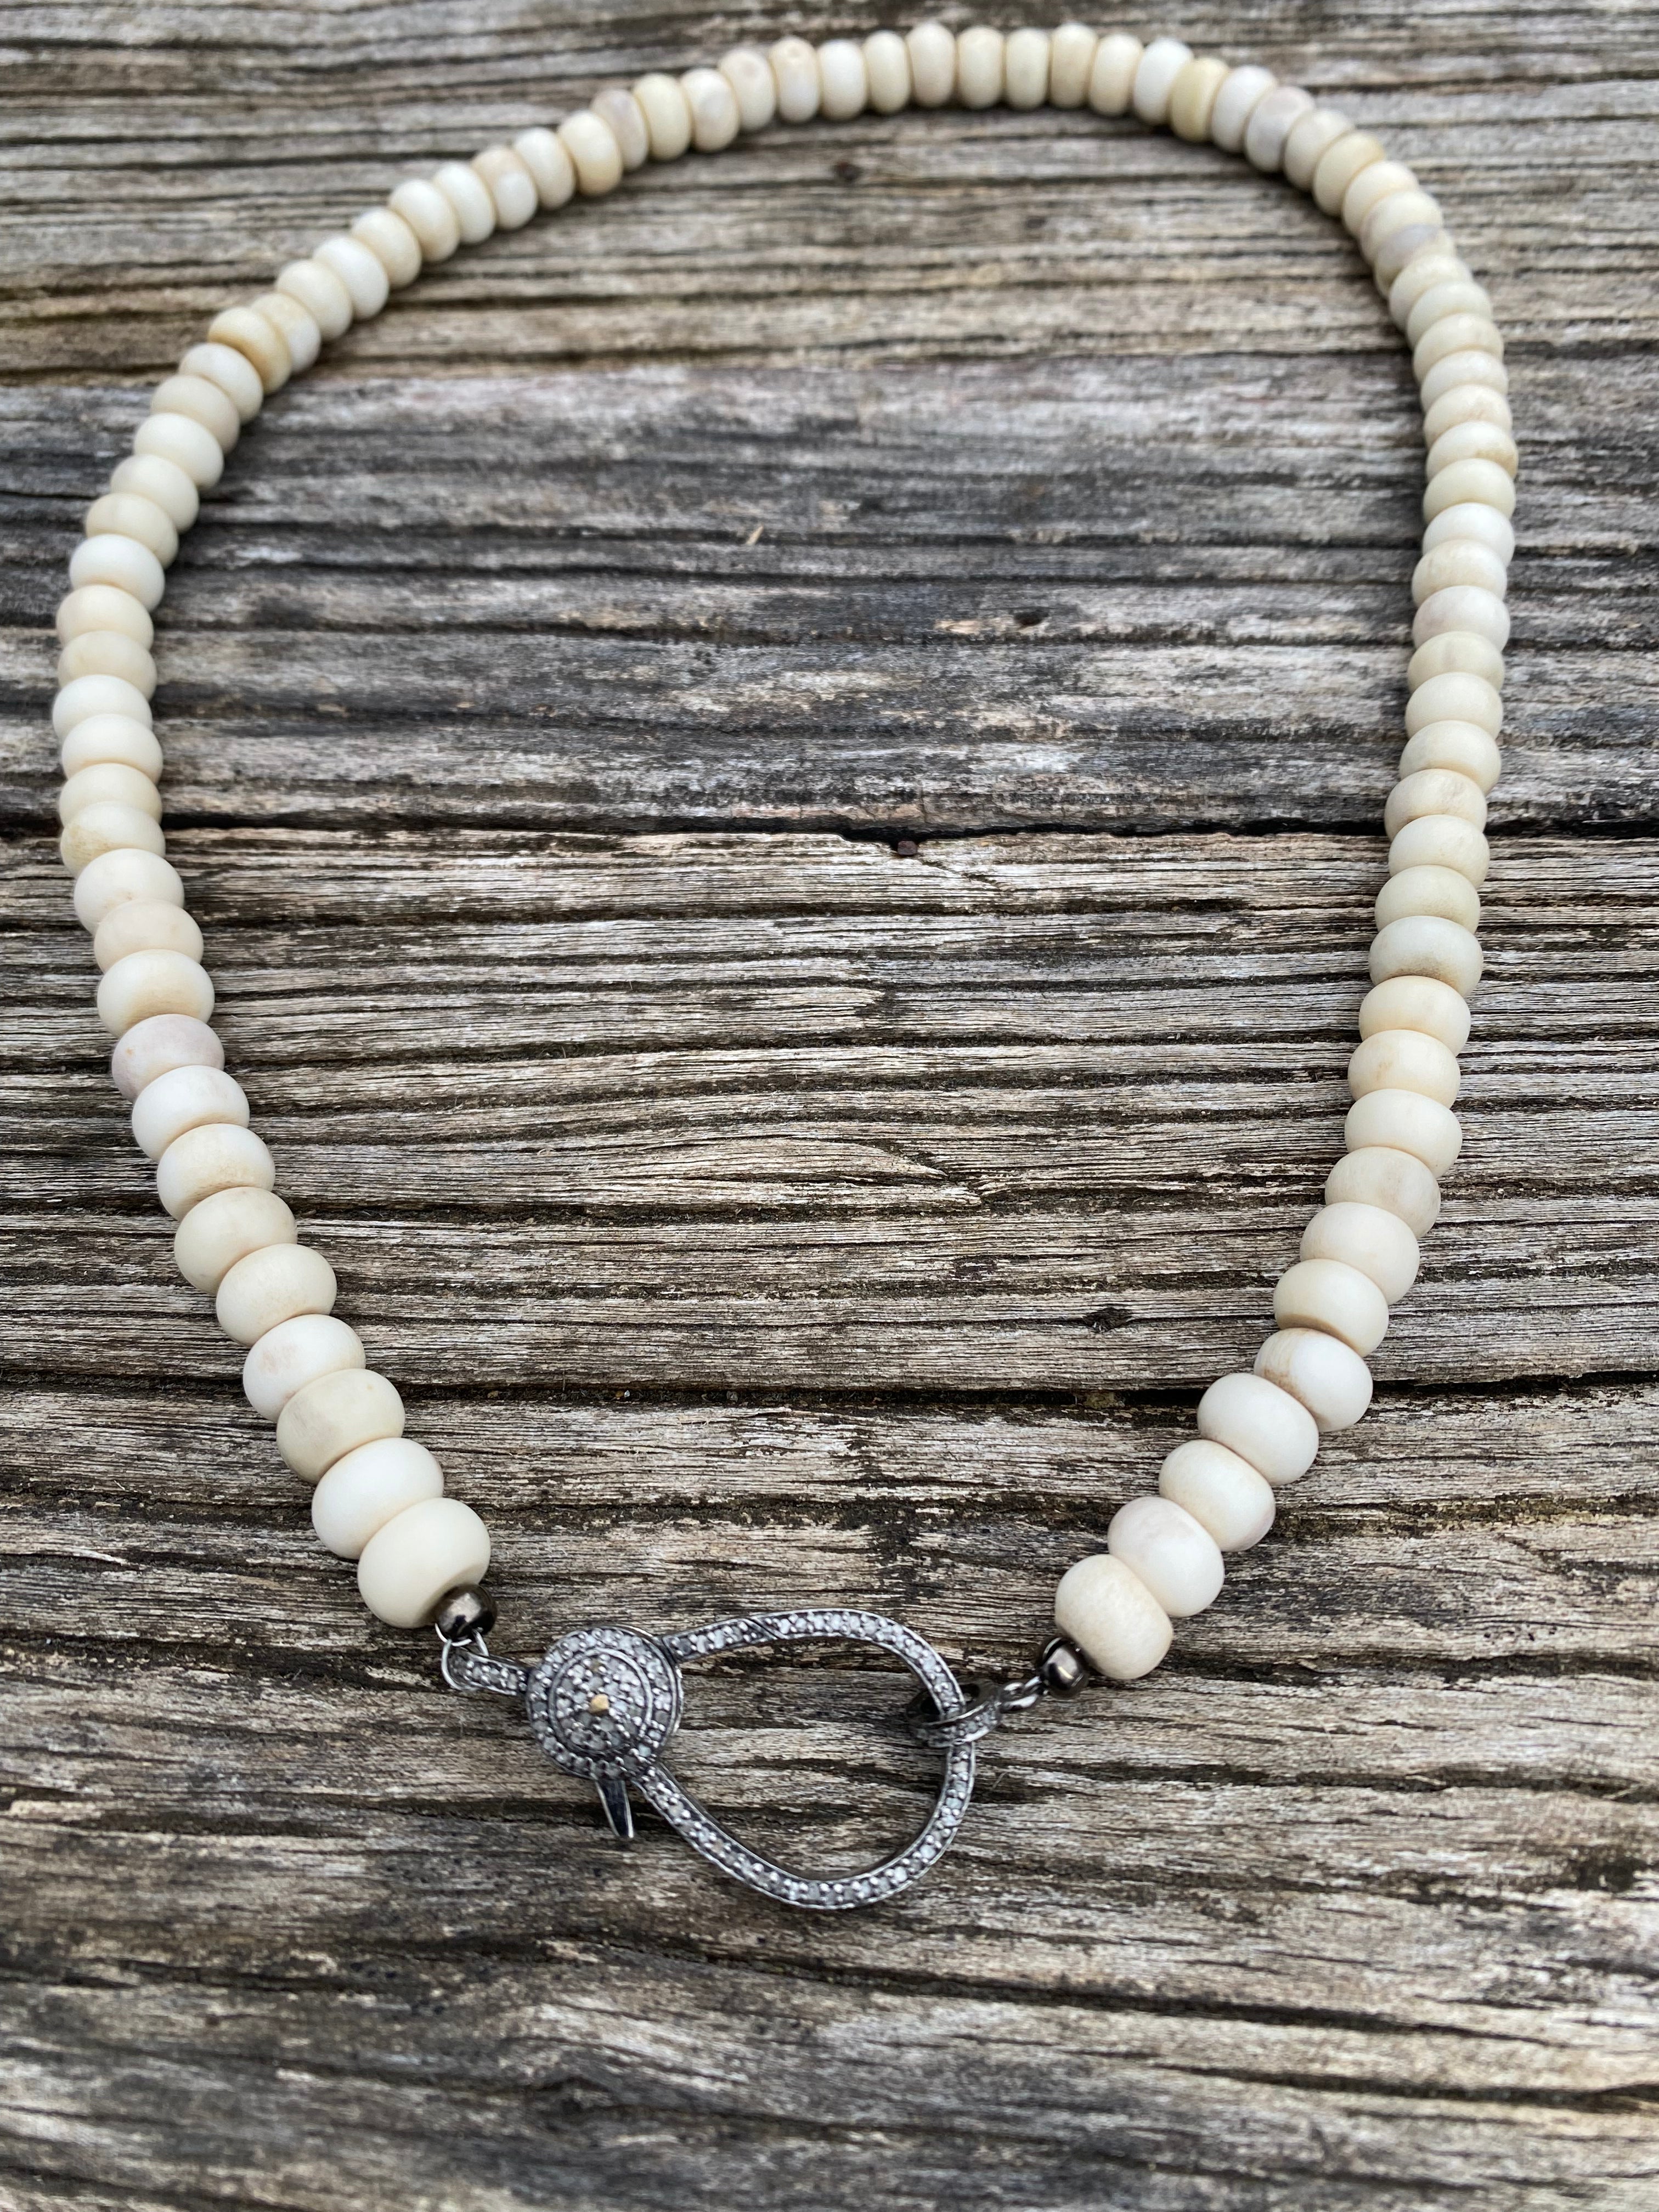 Naturally Shed Moose Antler Beaded Necklace with Large Pave Diamond Clasp